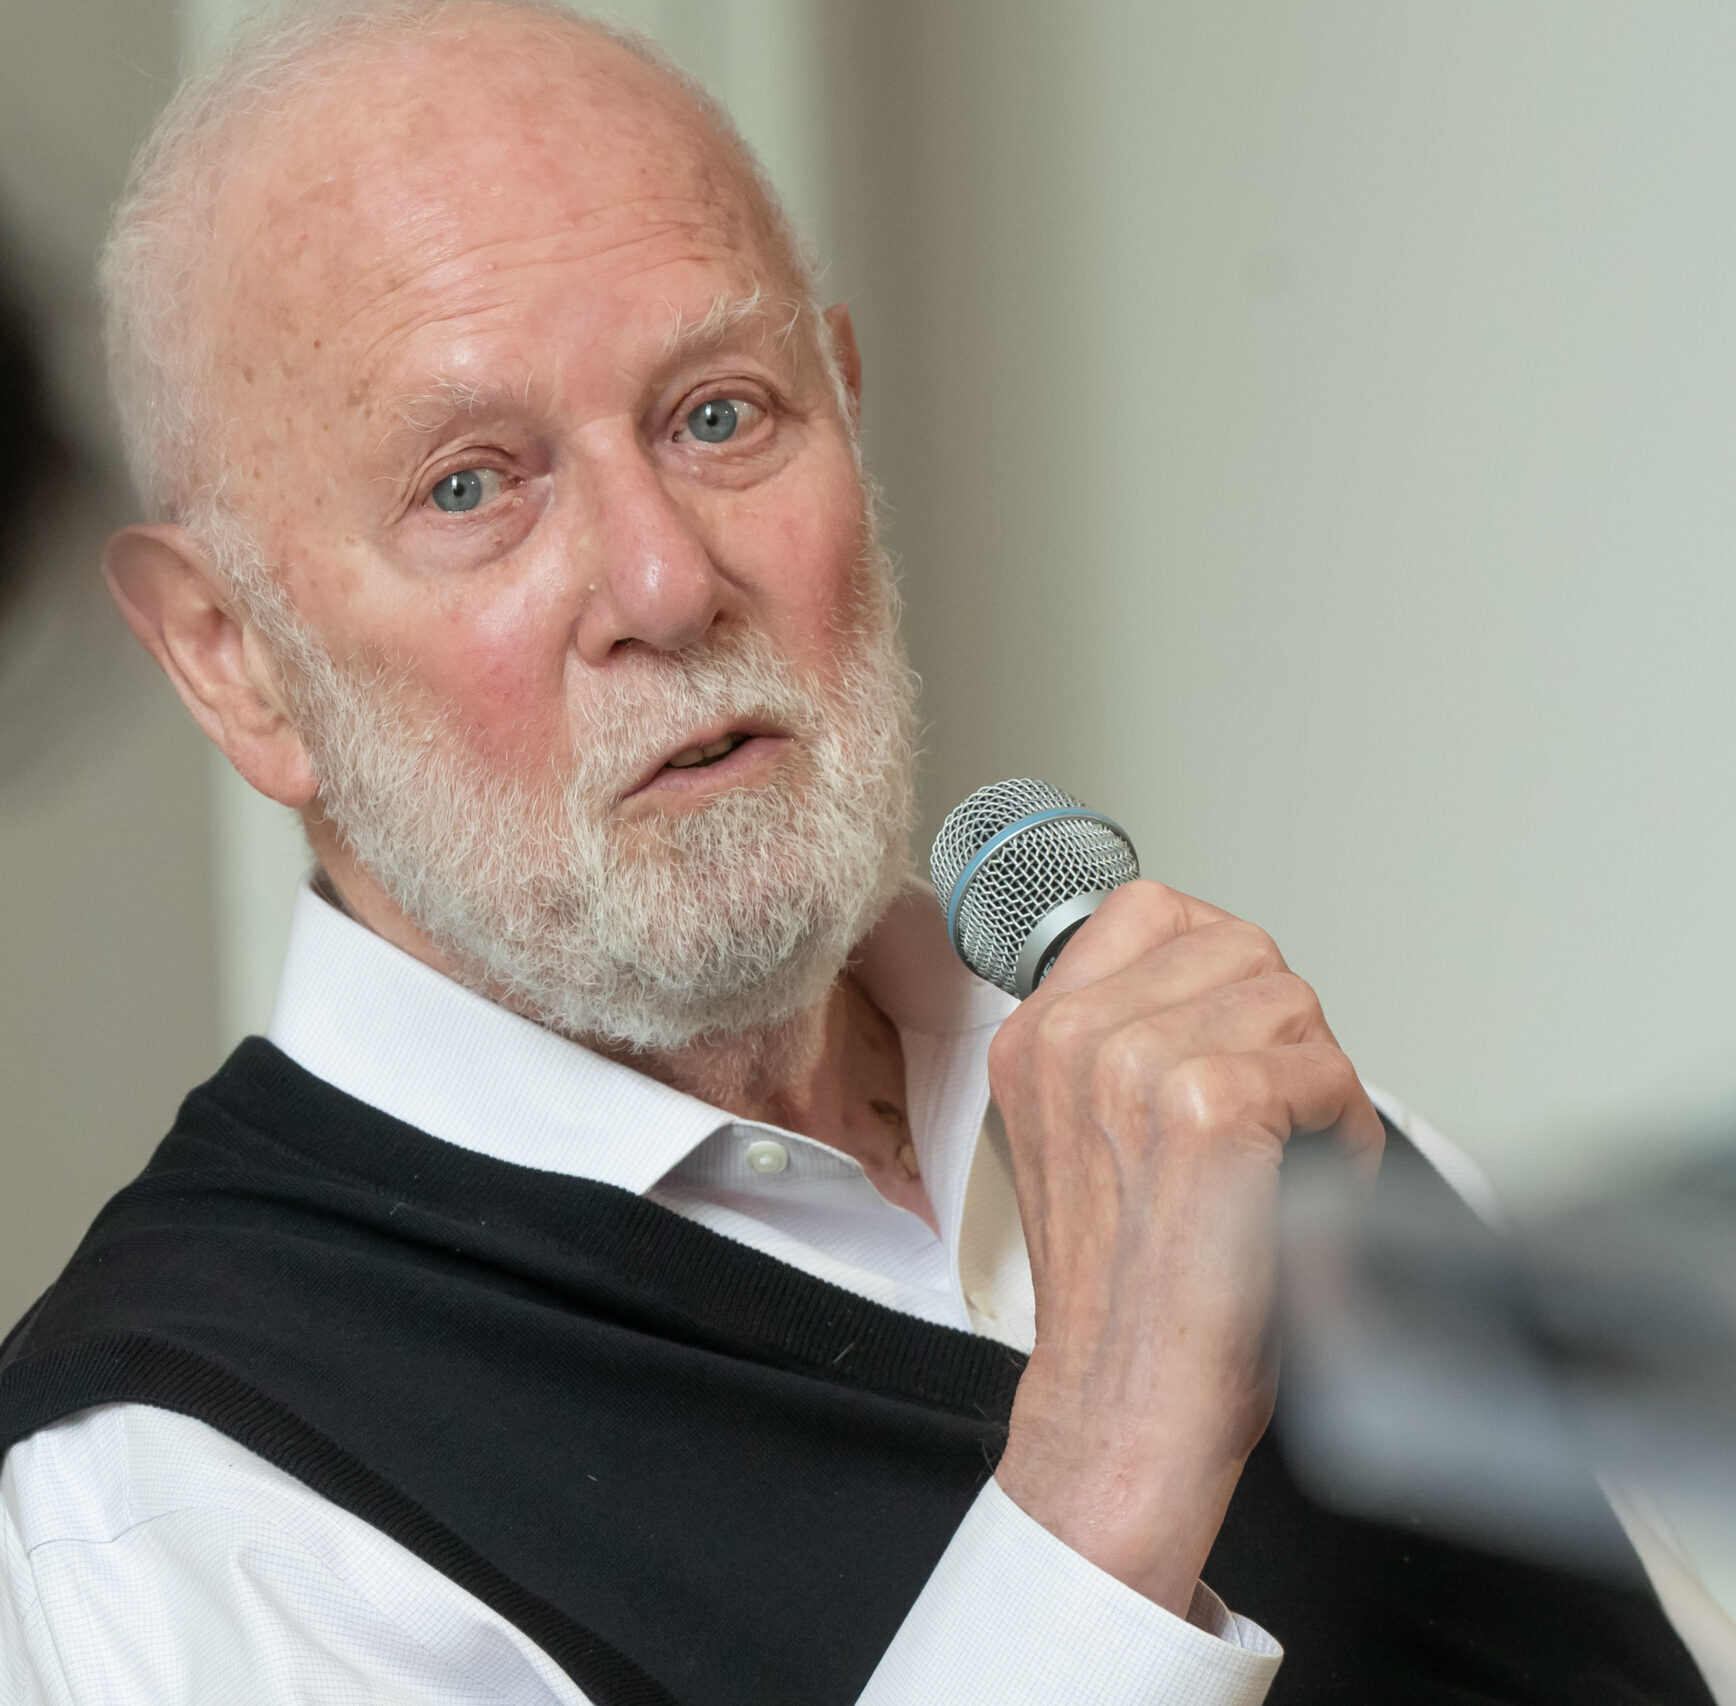 A man speaks into a microphone. He was white hair and a white beard.